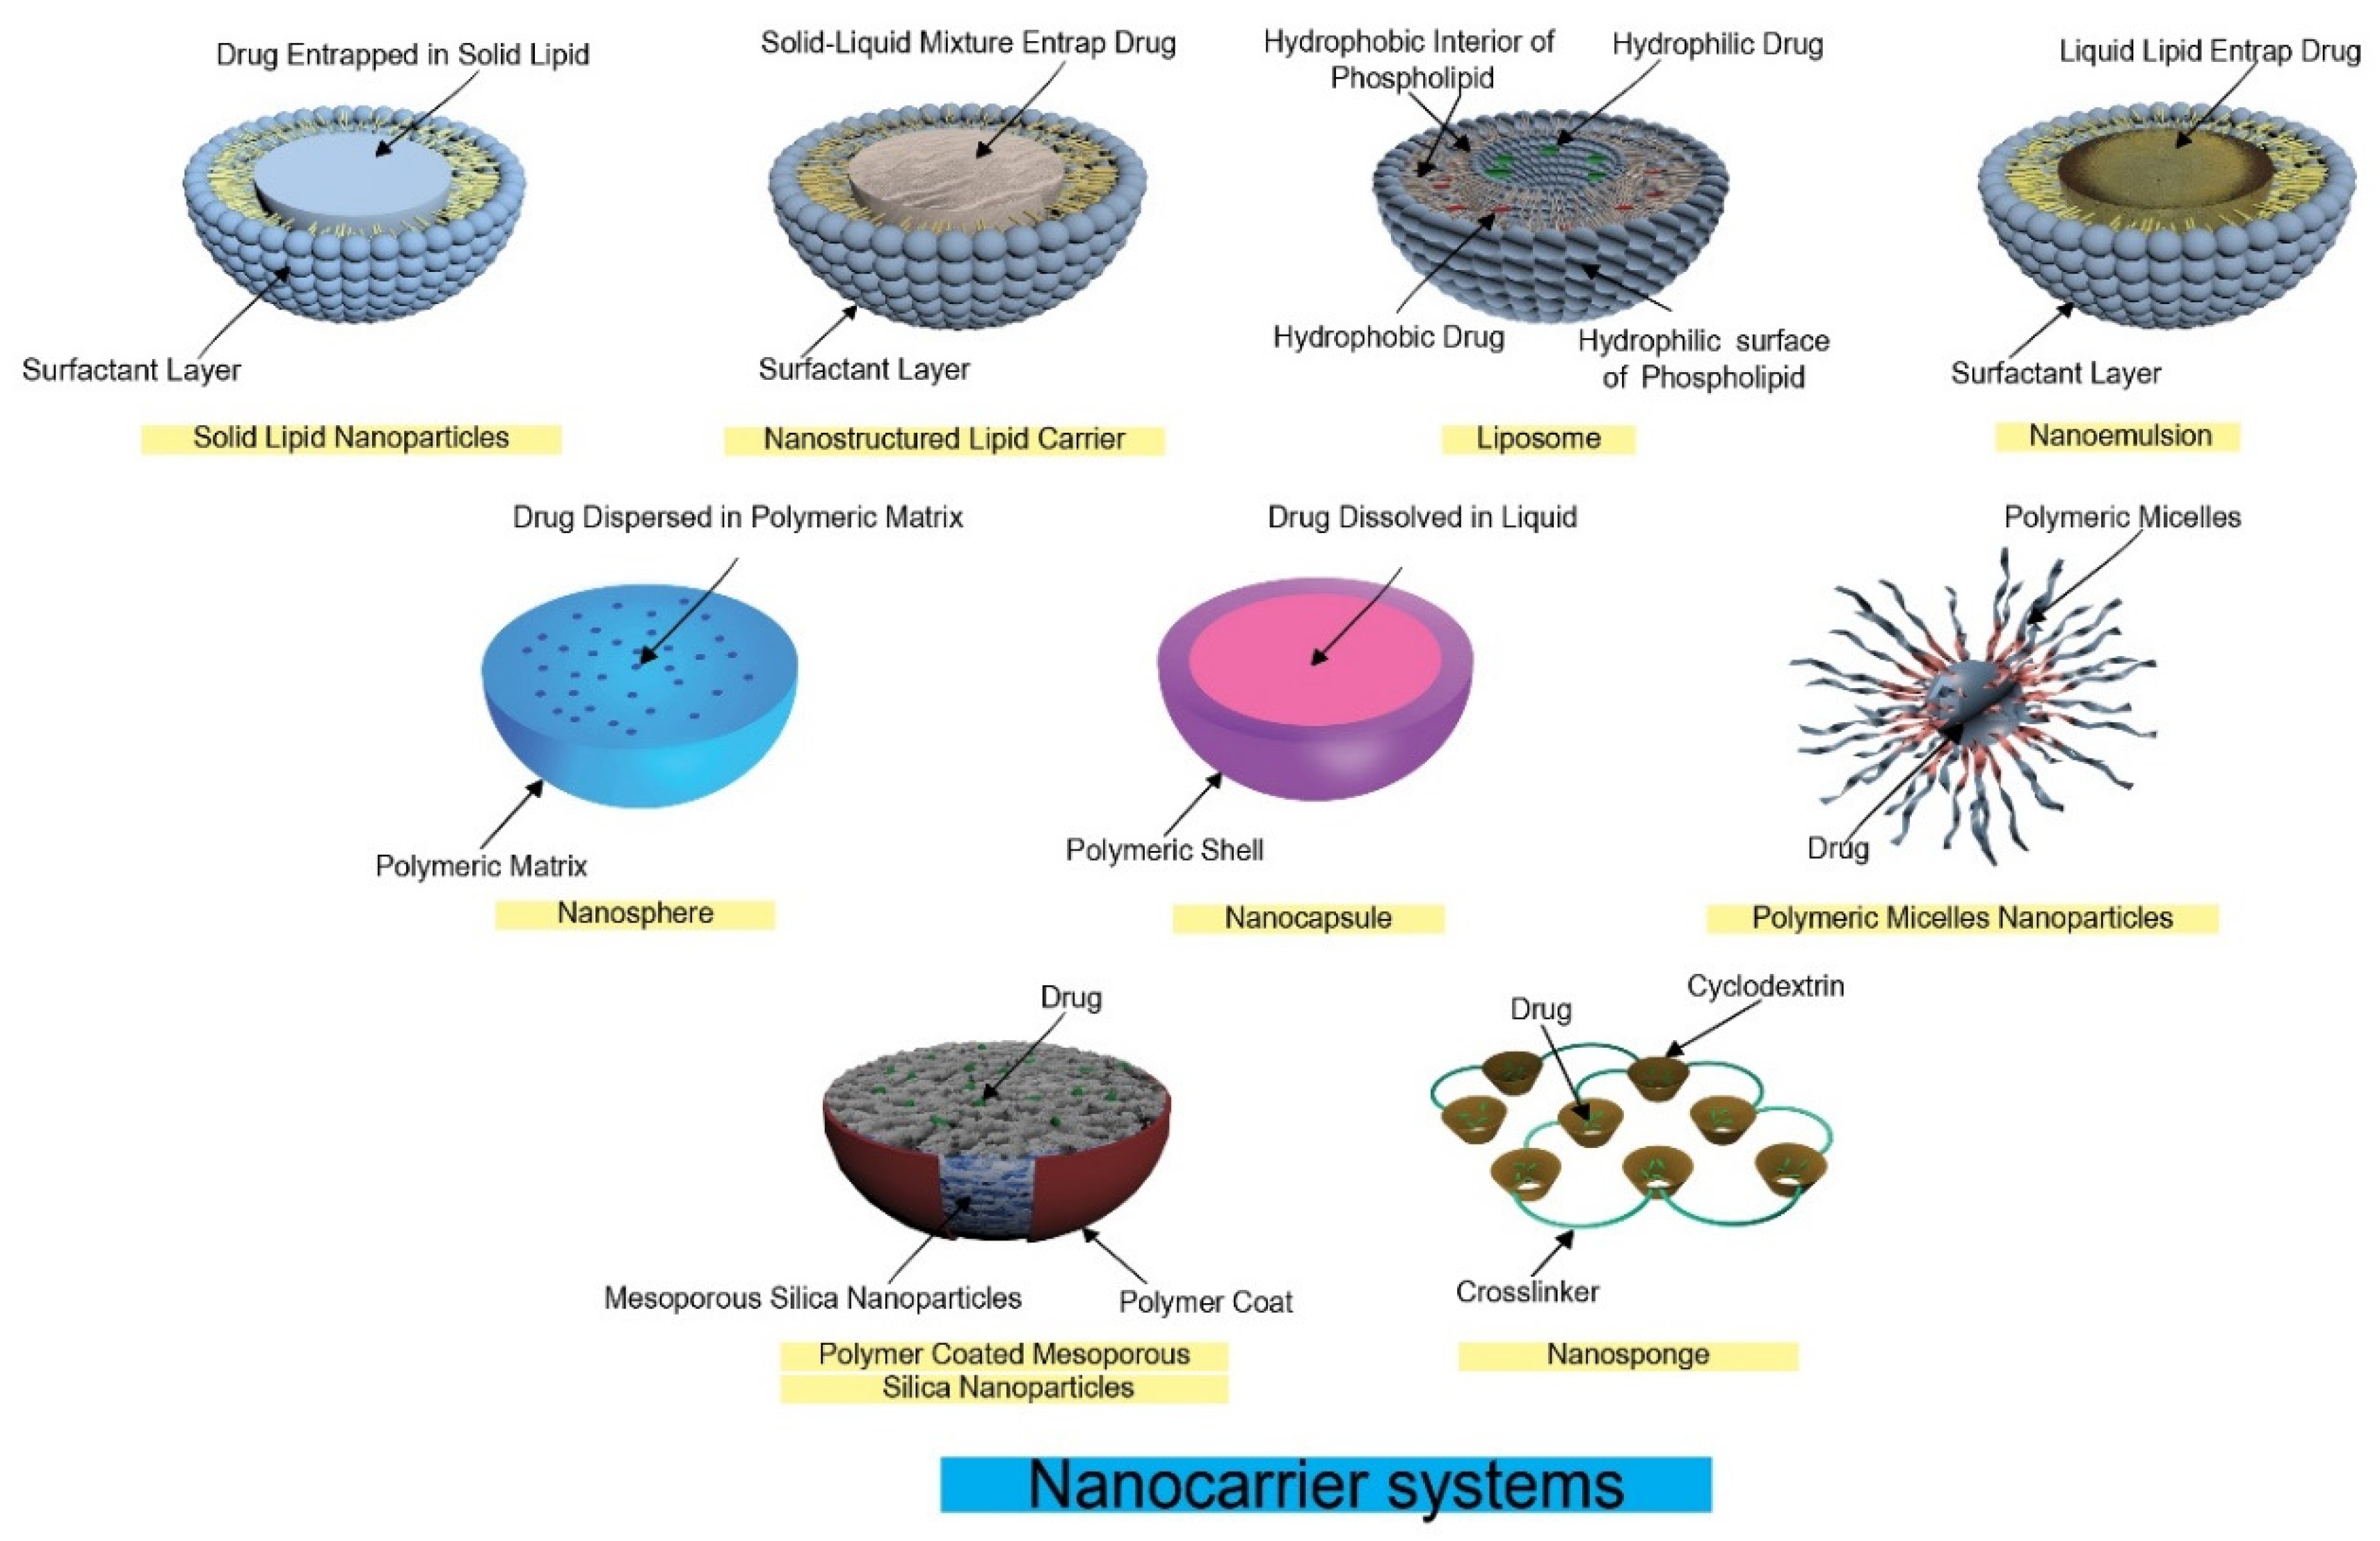 Different nanocarrier systems used for taste masking